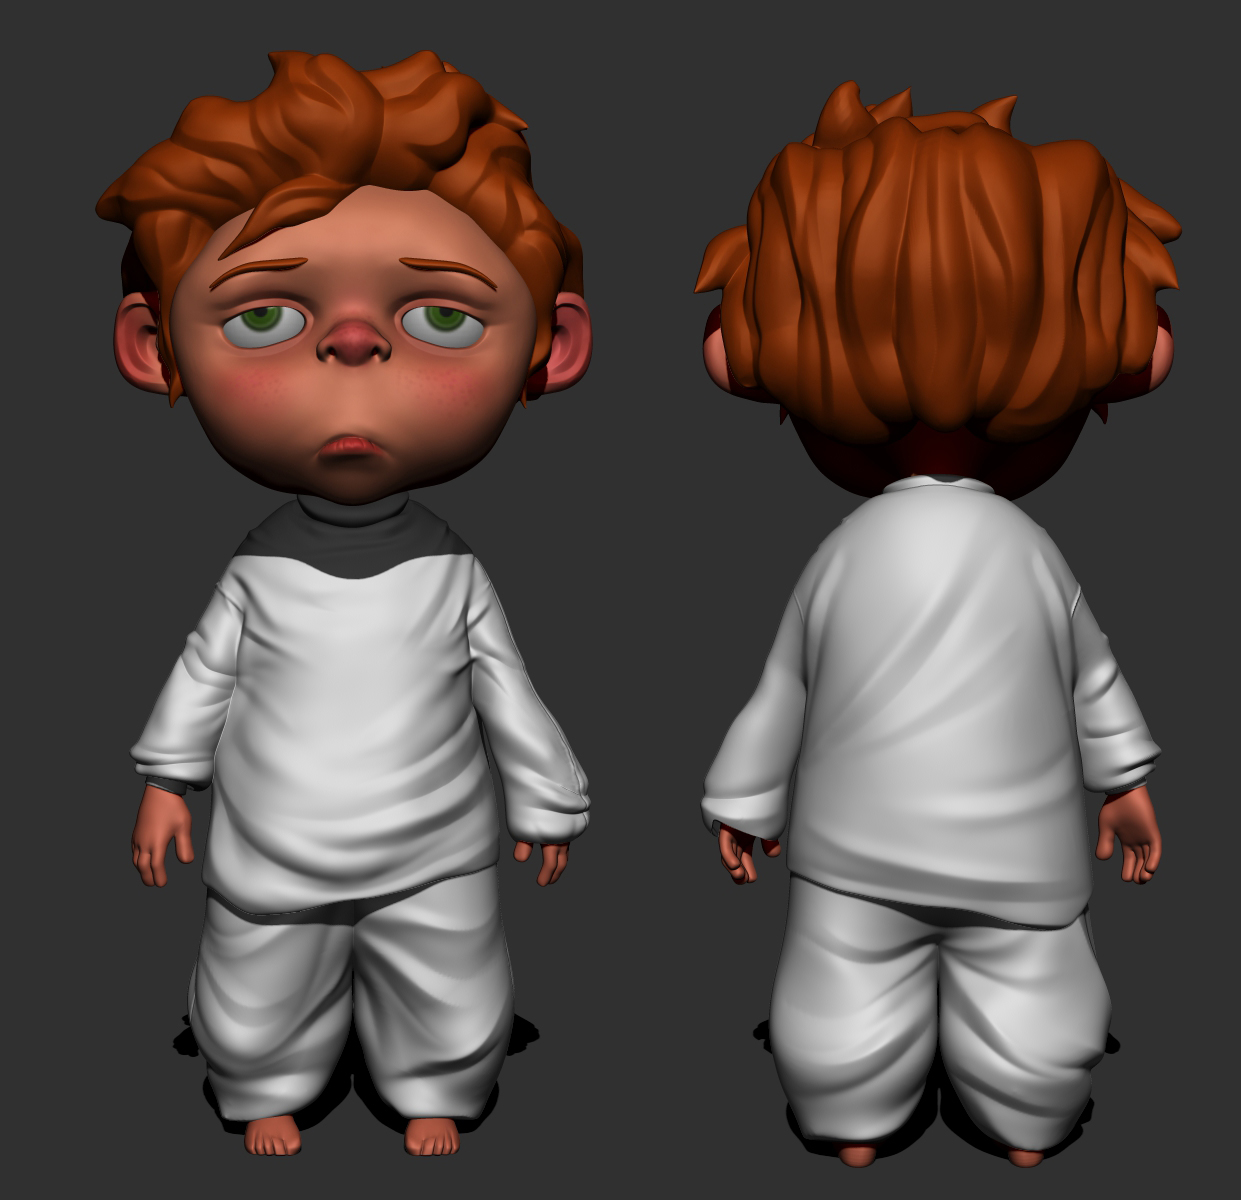 how can i stop zbrush sleeping